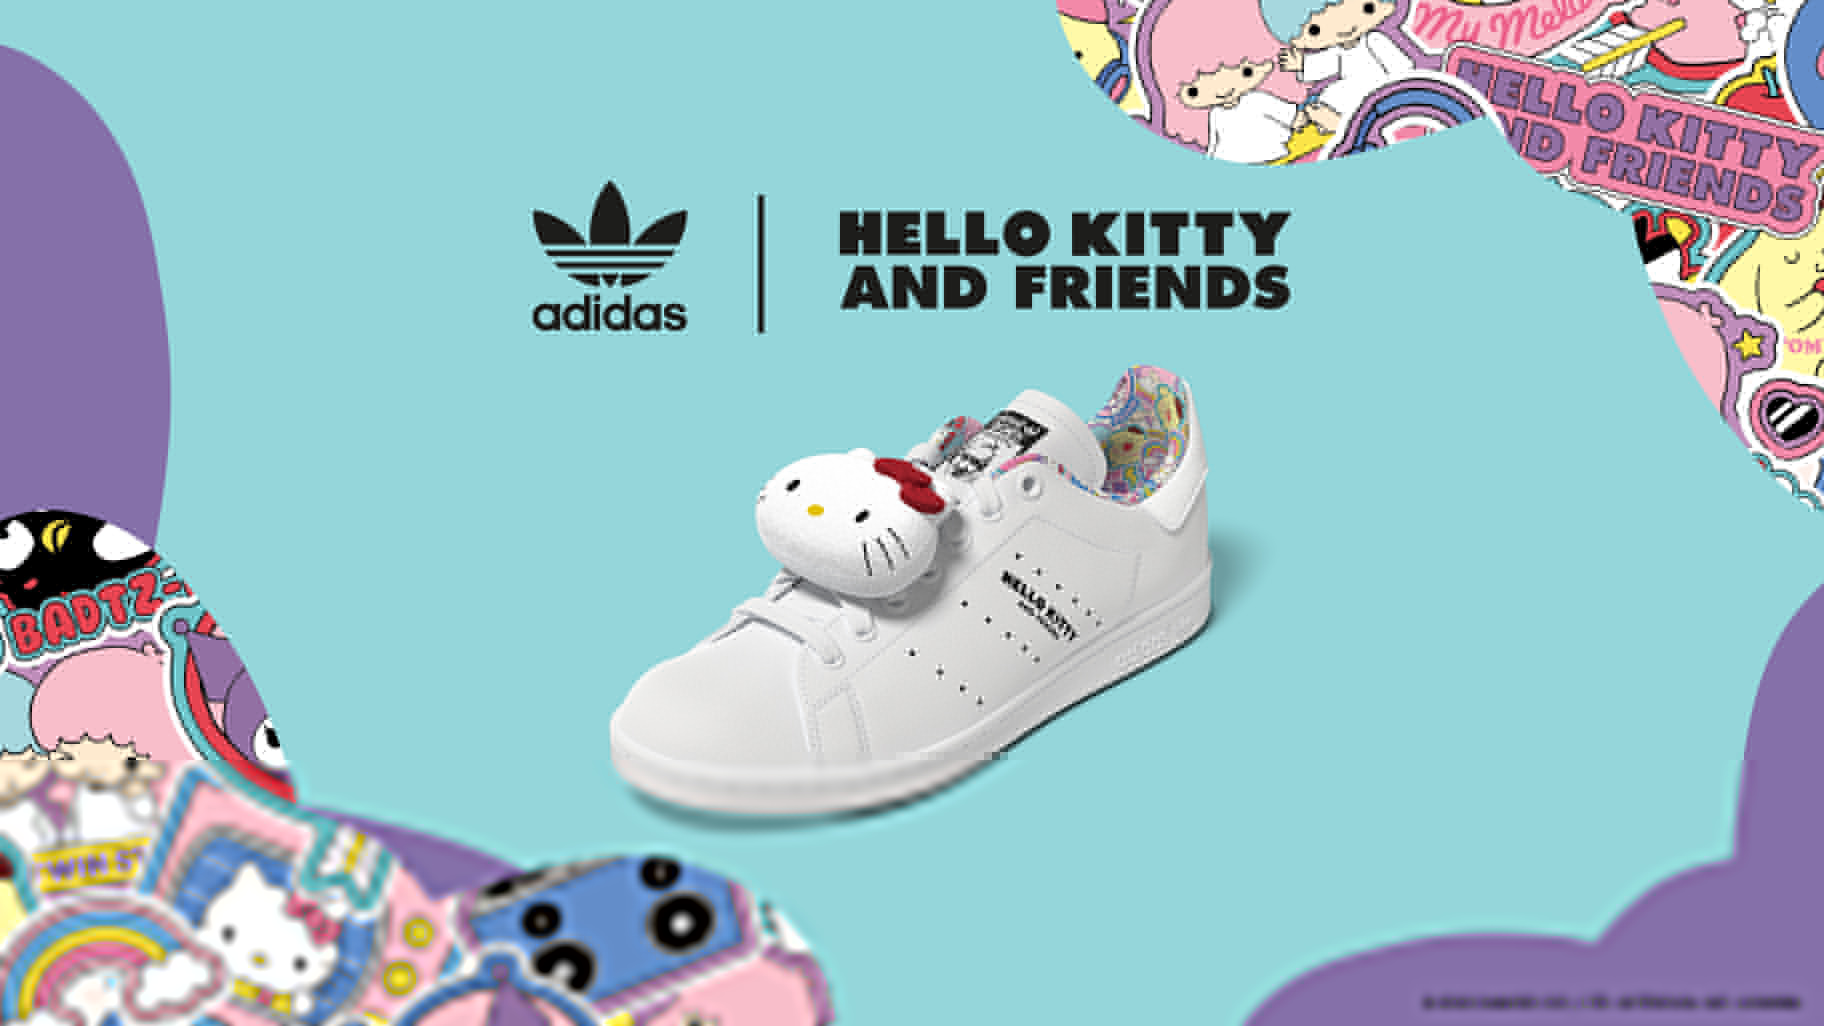 Adidas x Hello Kitty Collaboration Footwear Will Release on April 10